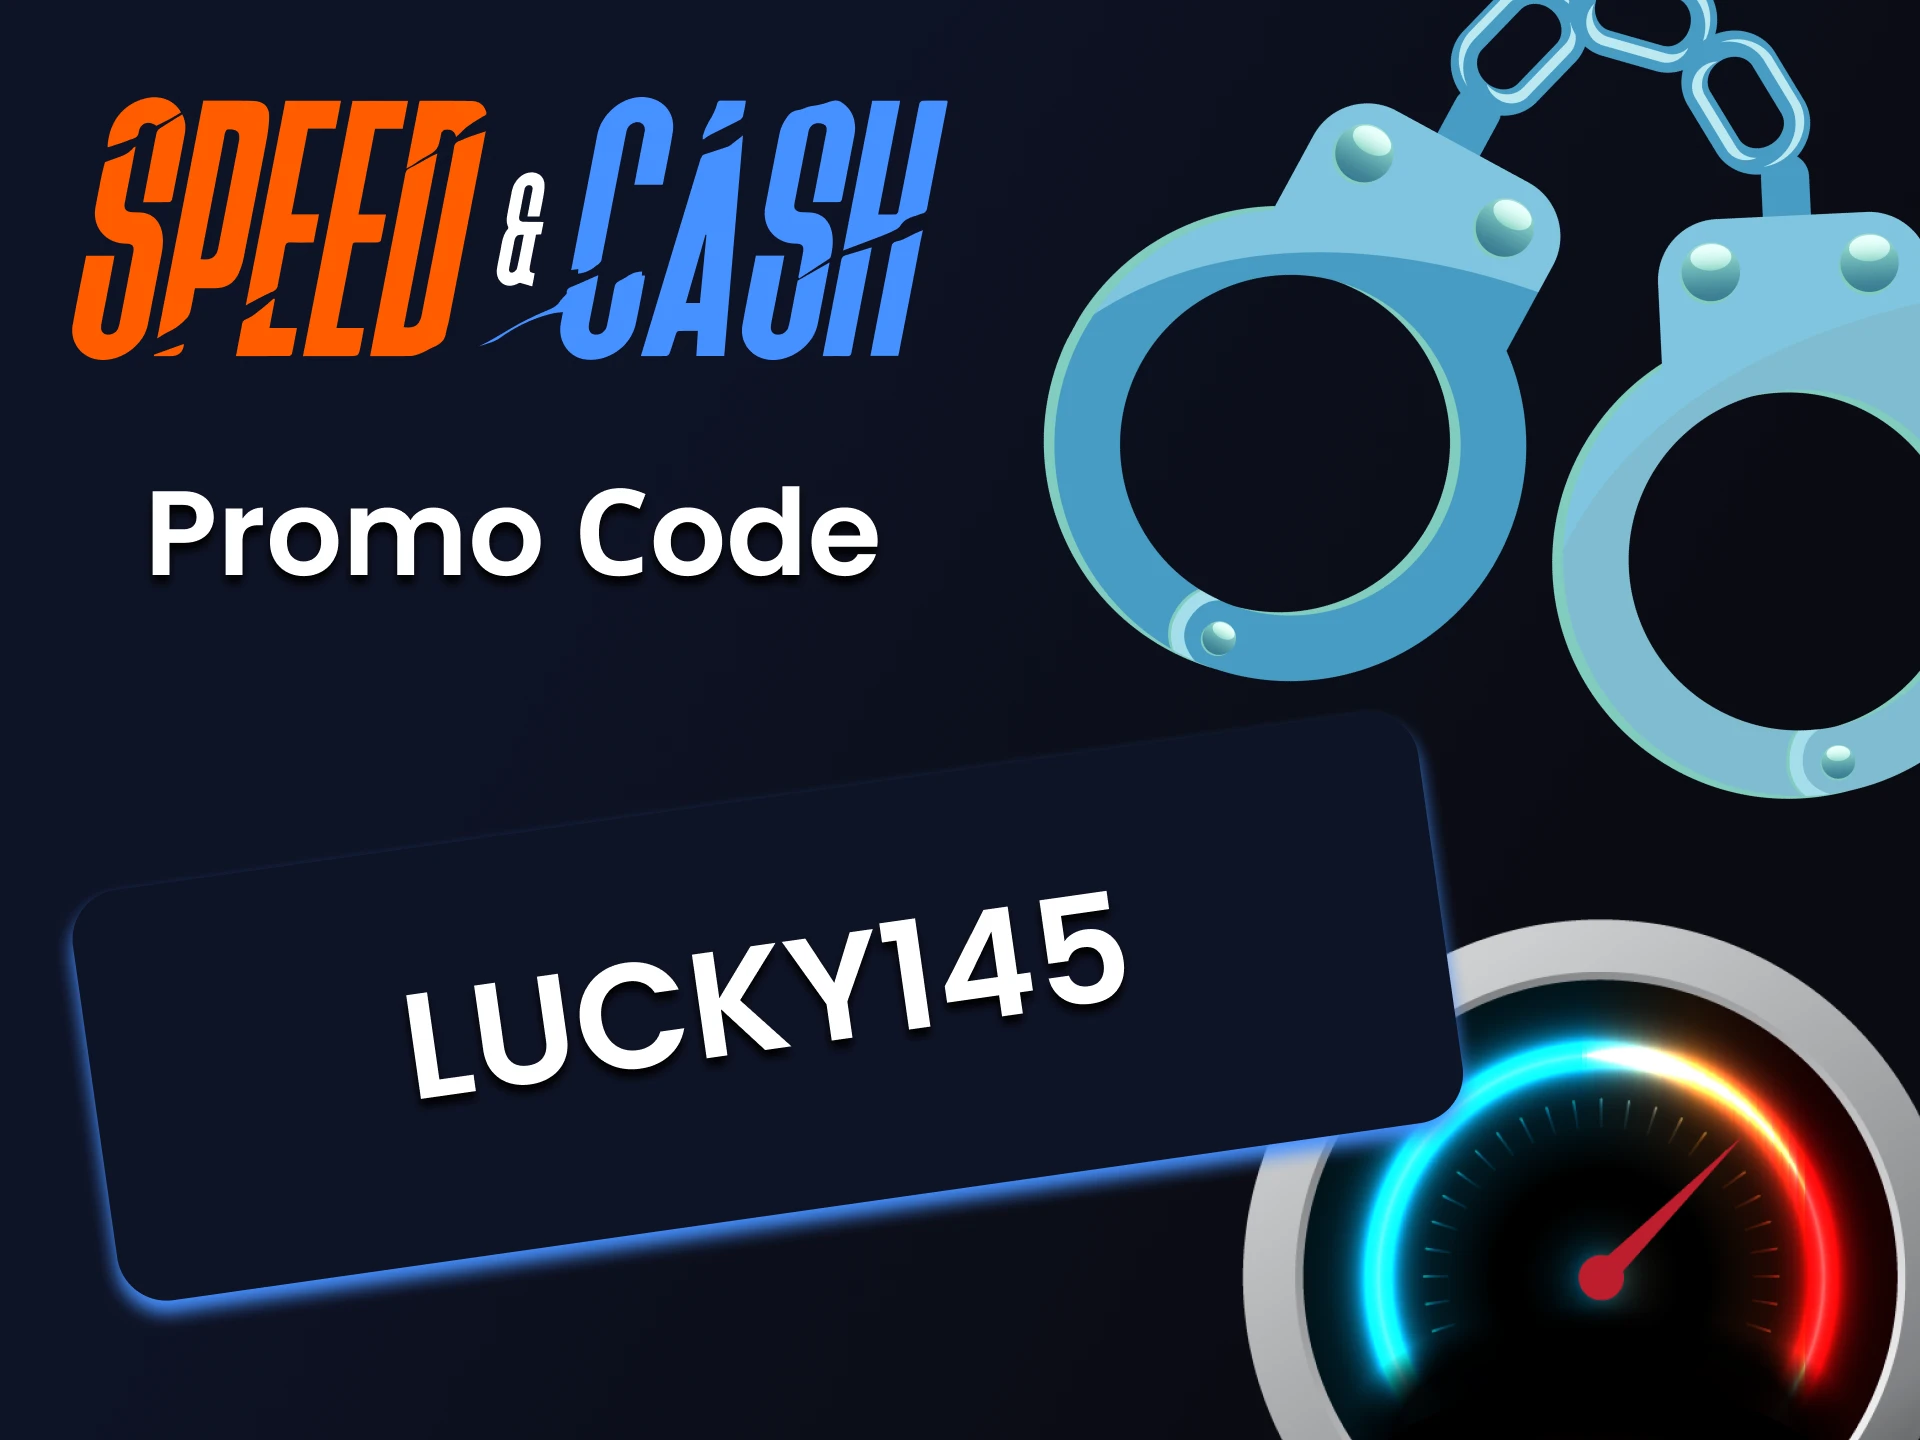 Enter promo code to play Speed&Cash.